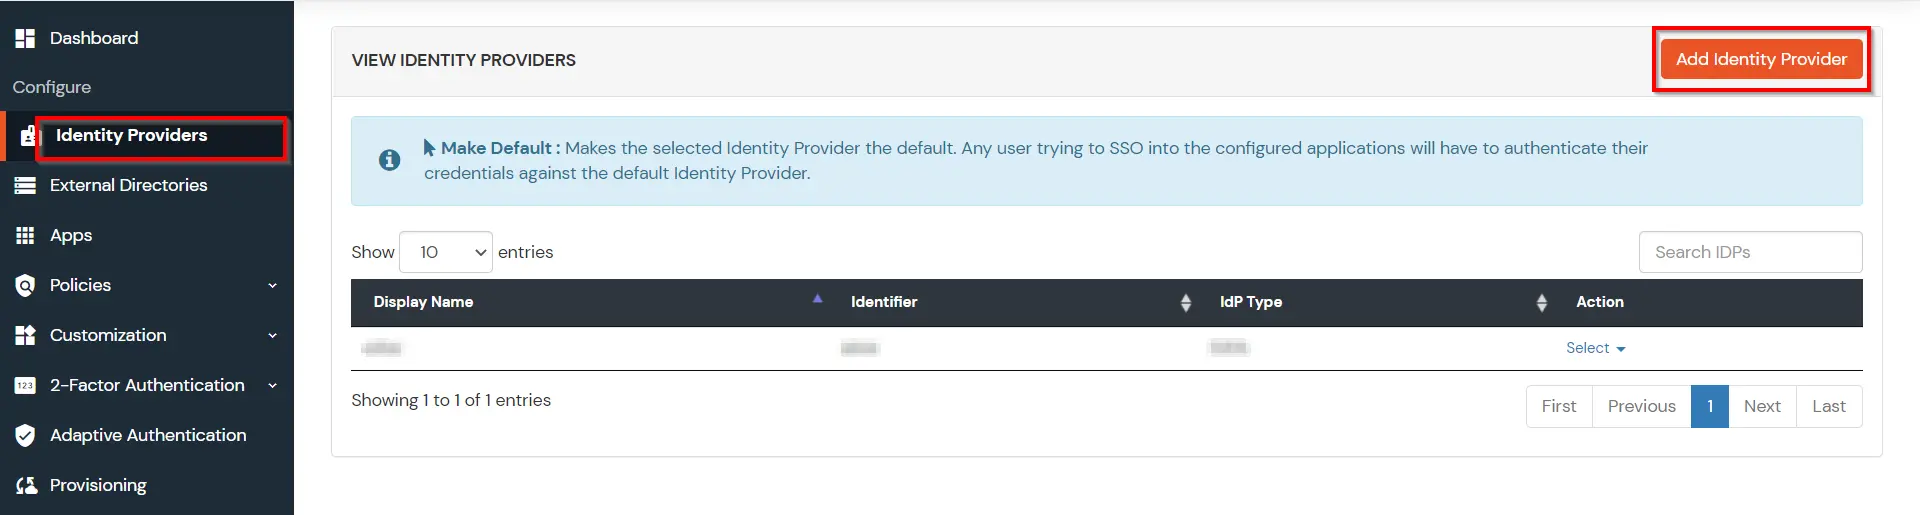 Select Identity Provider to add Active Directory as IDP